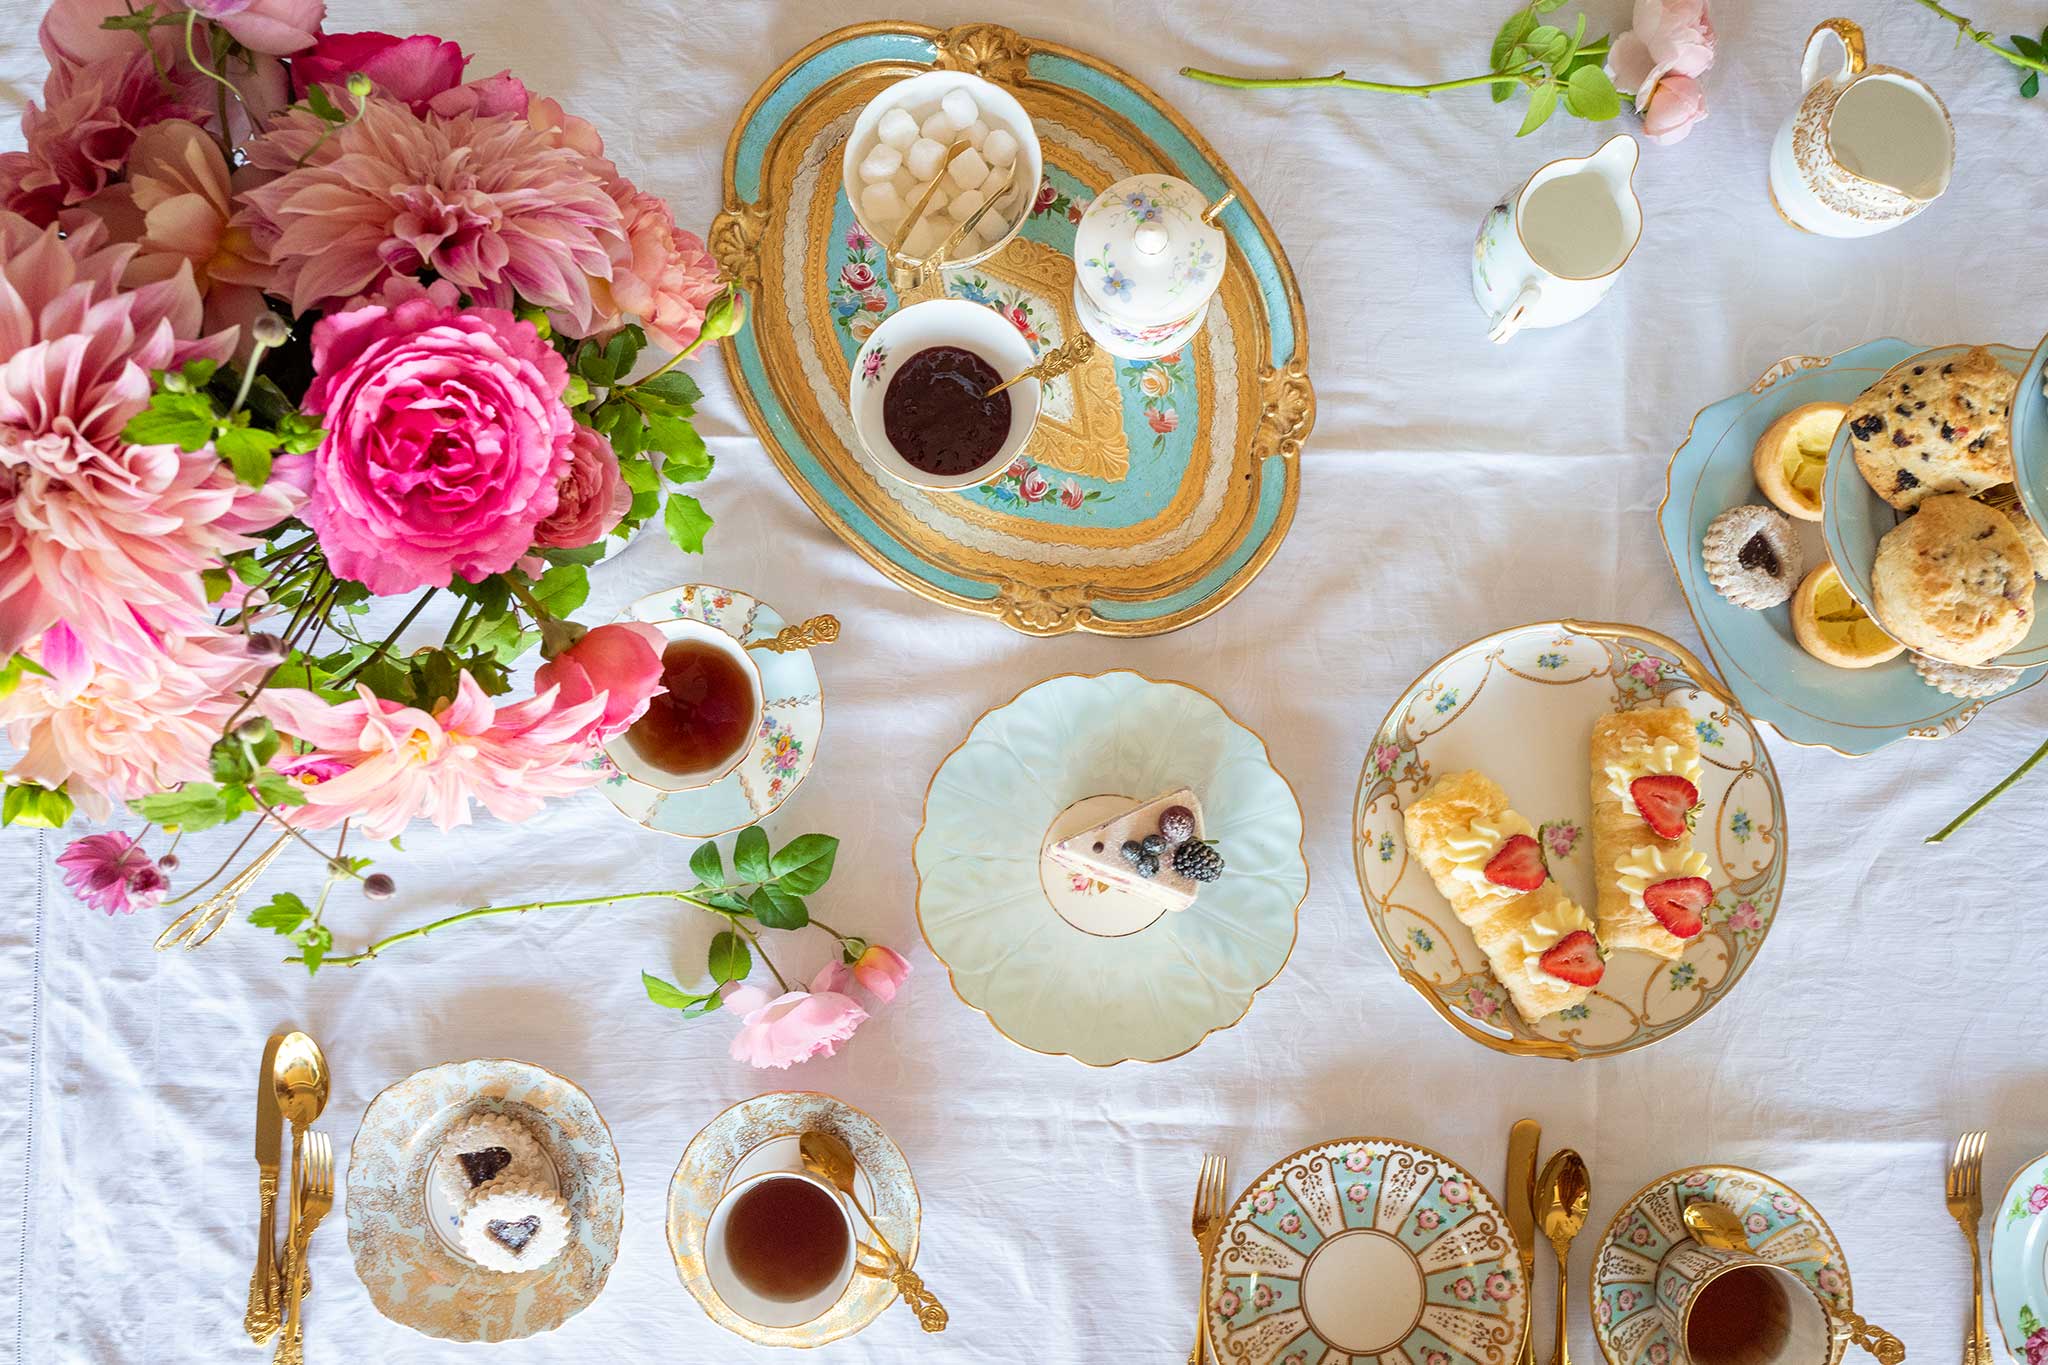 Delight your guests with a vintage tea party